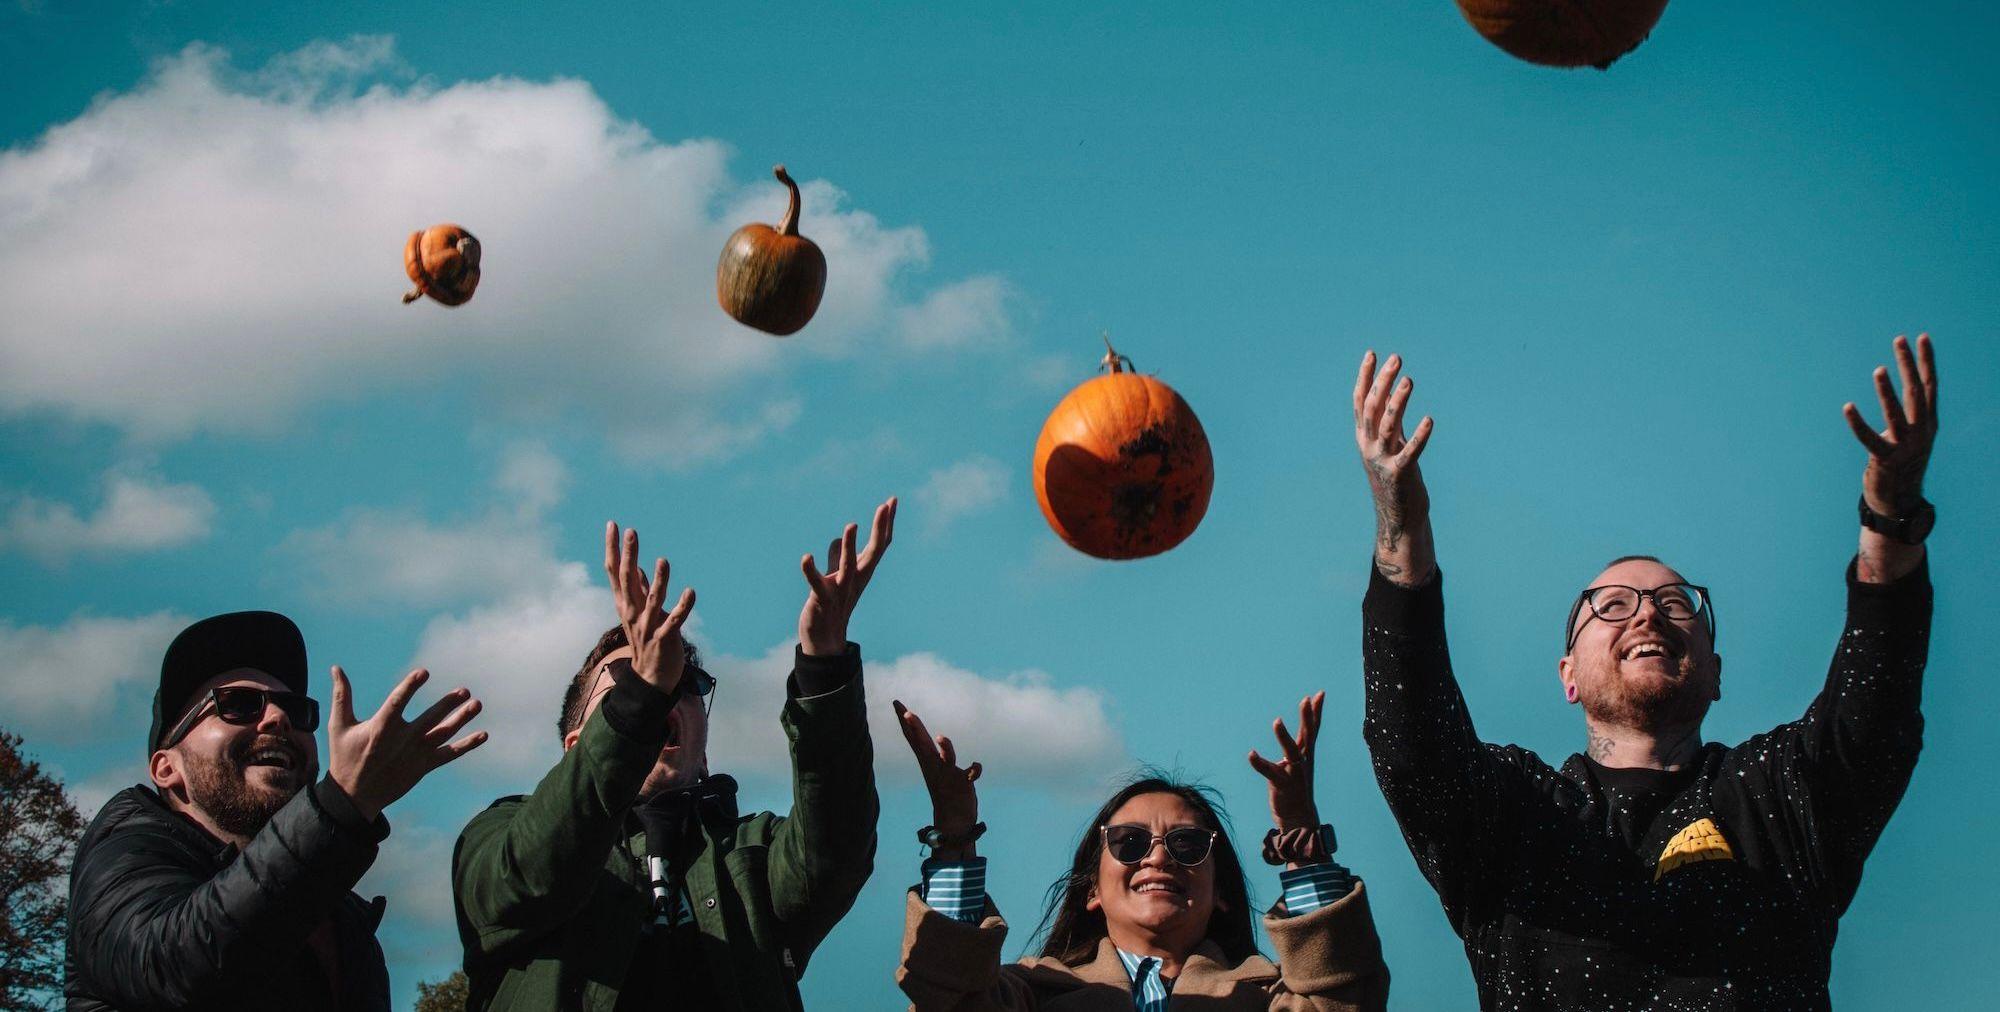 Four people throwing pumpkins in the air and smiling.